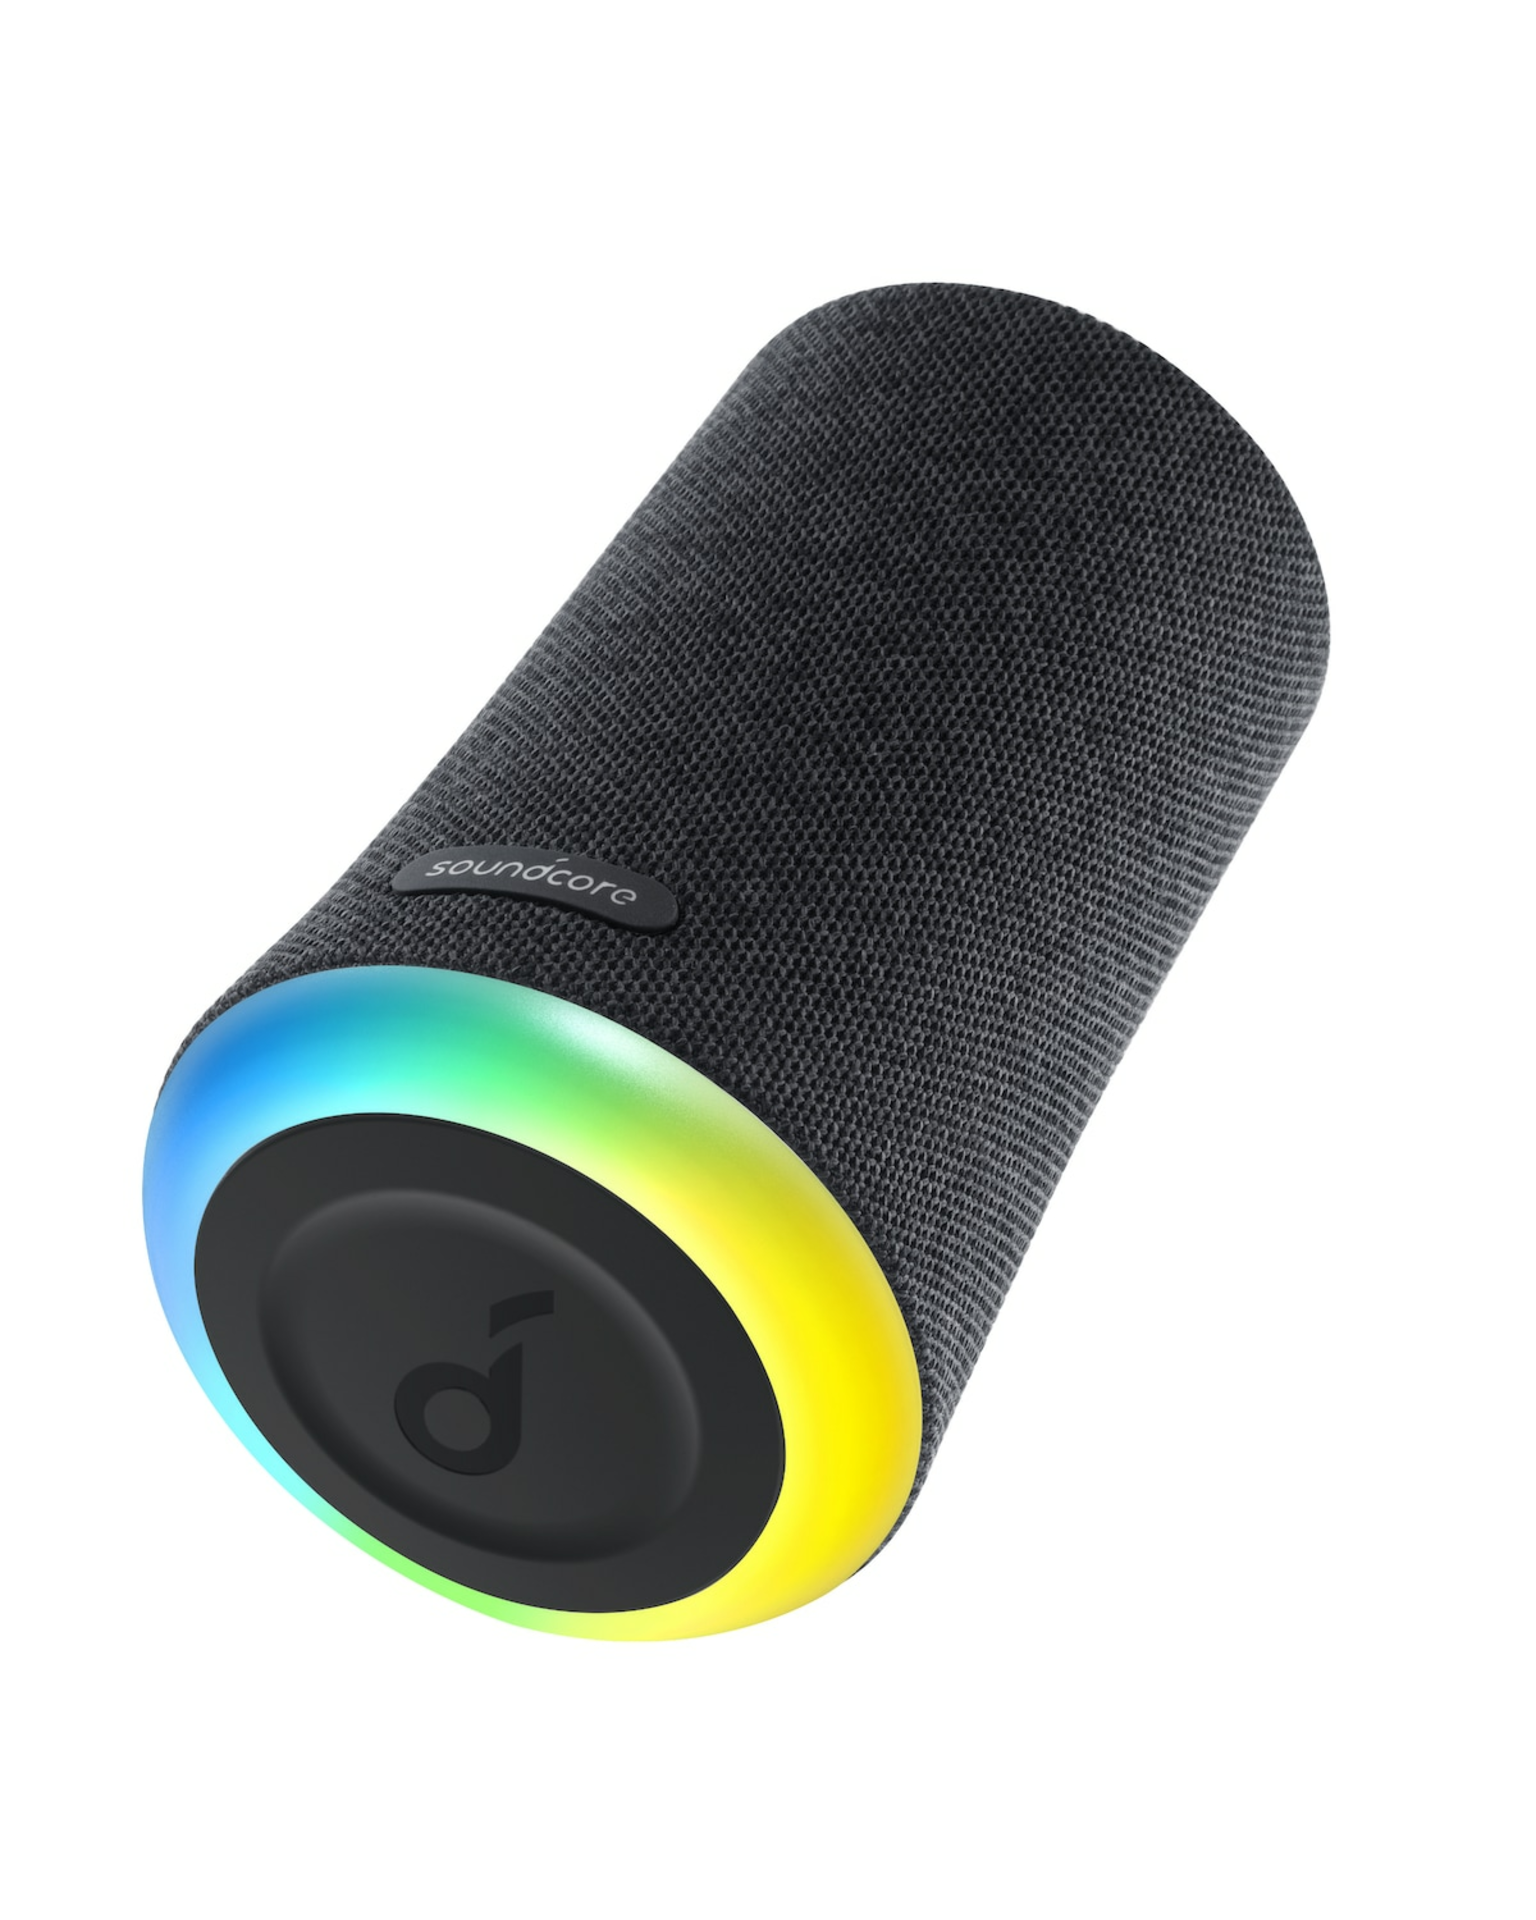 Soundcore Flare Mini Waterproof Bluetooth Speaker - Incredible Connection